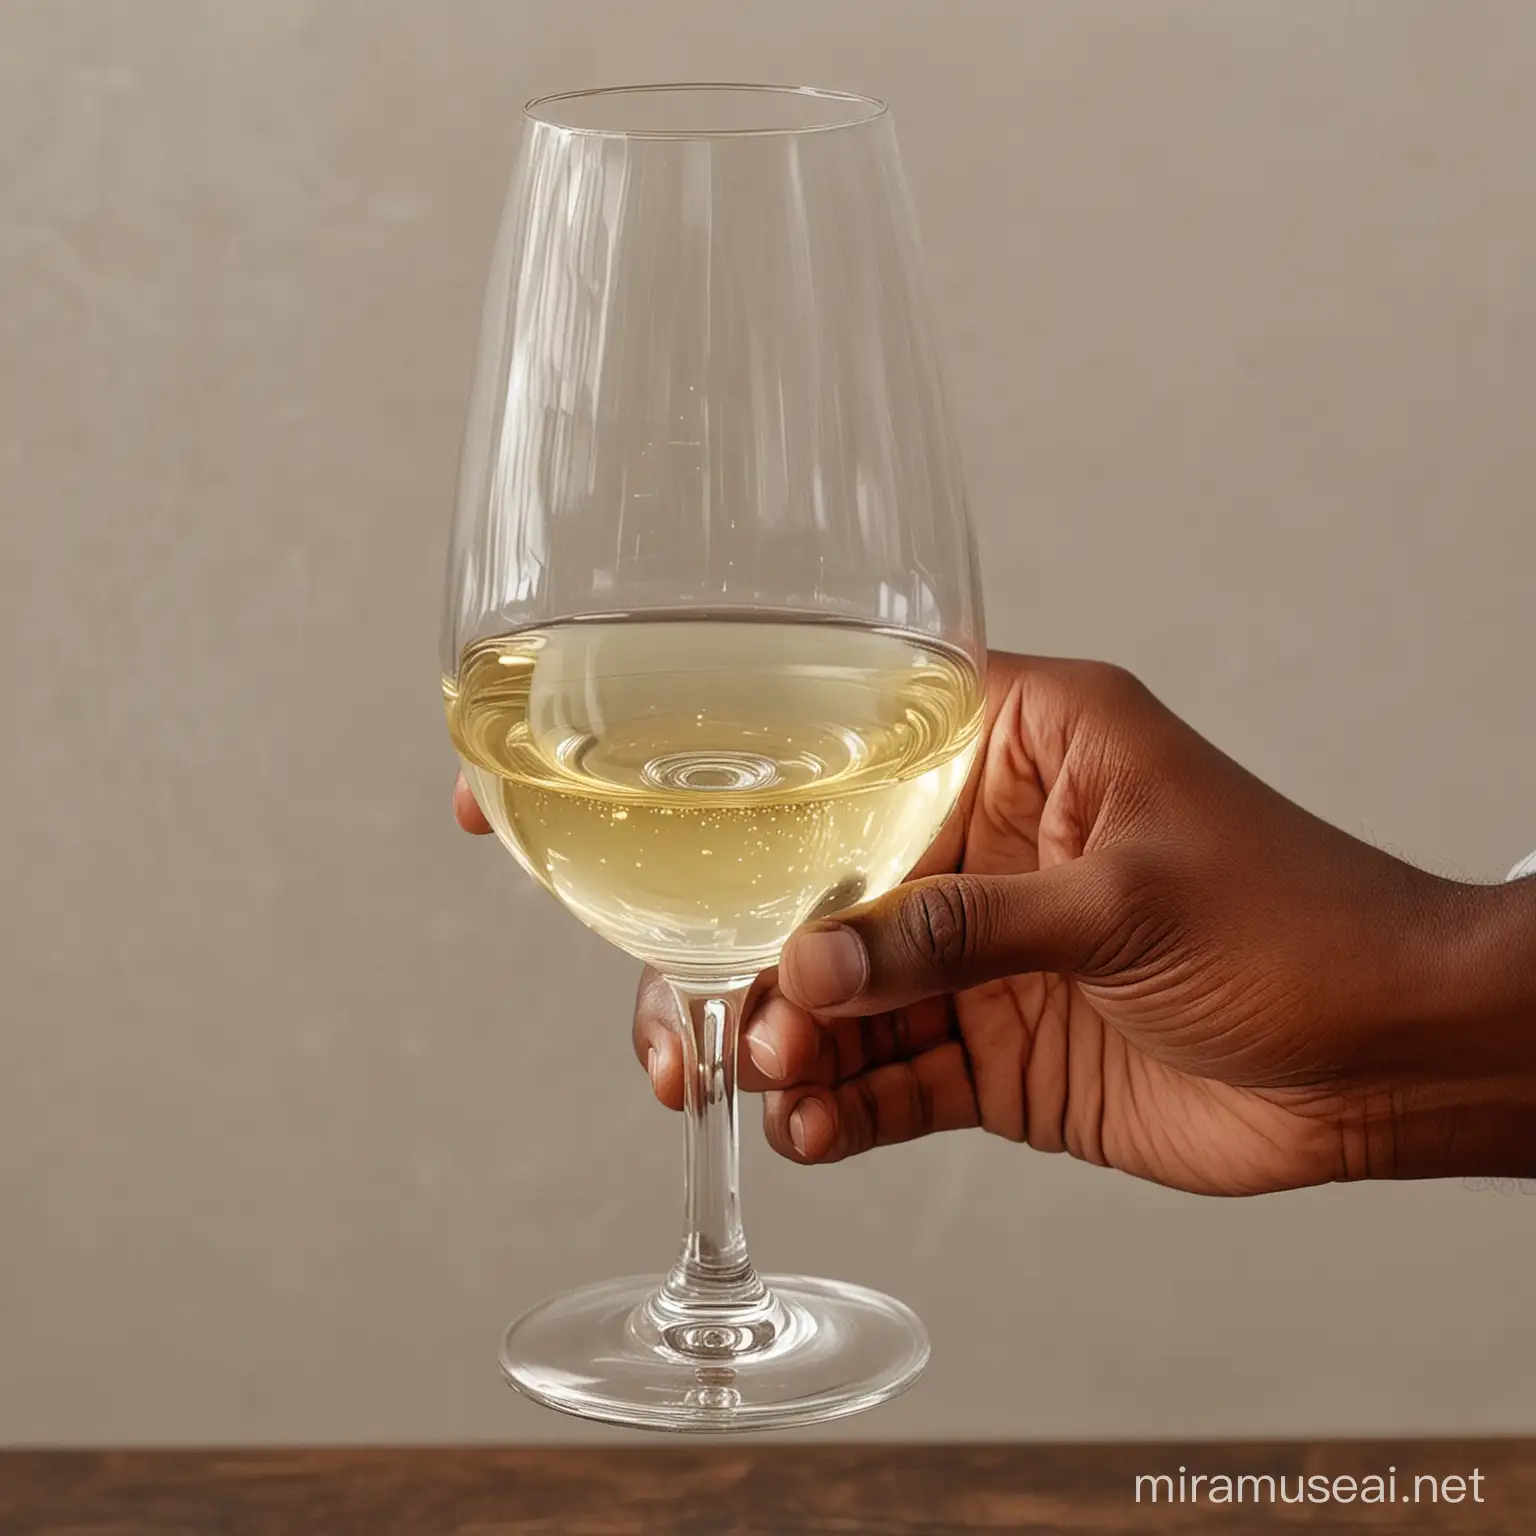 up close view of a black mans hand holding the bowl of a wine glass up close with white wine in the glass some